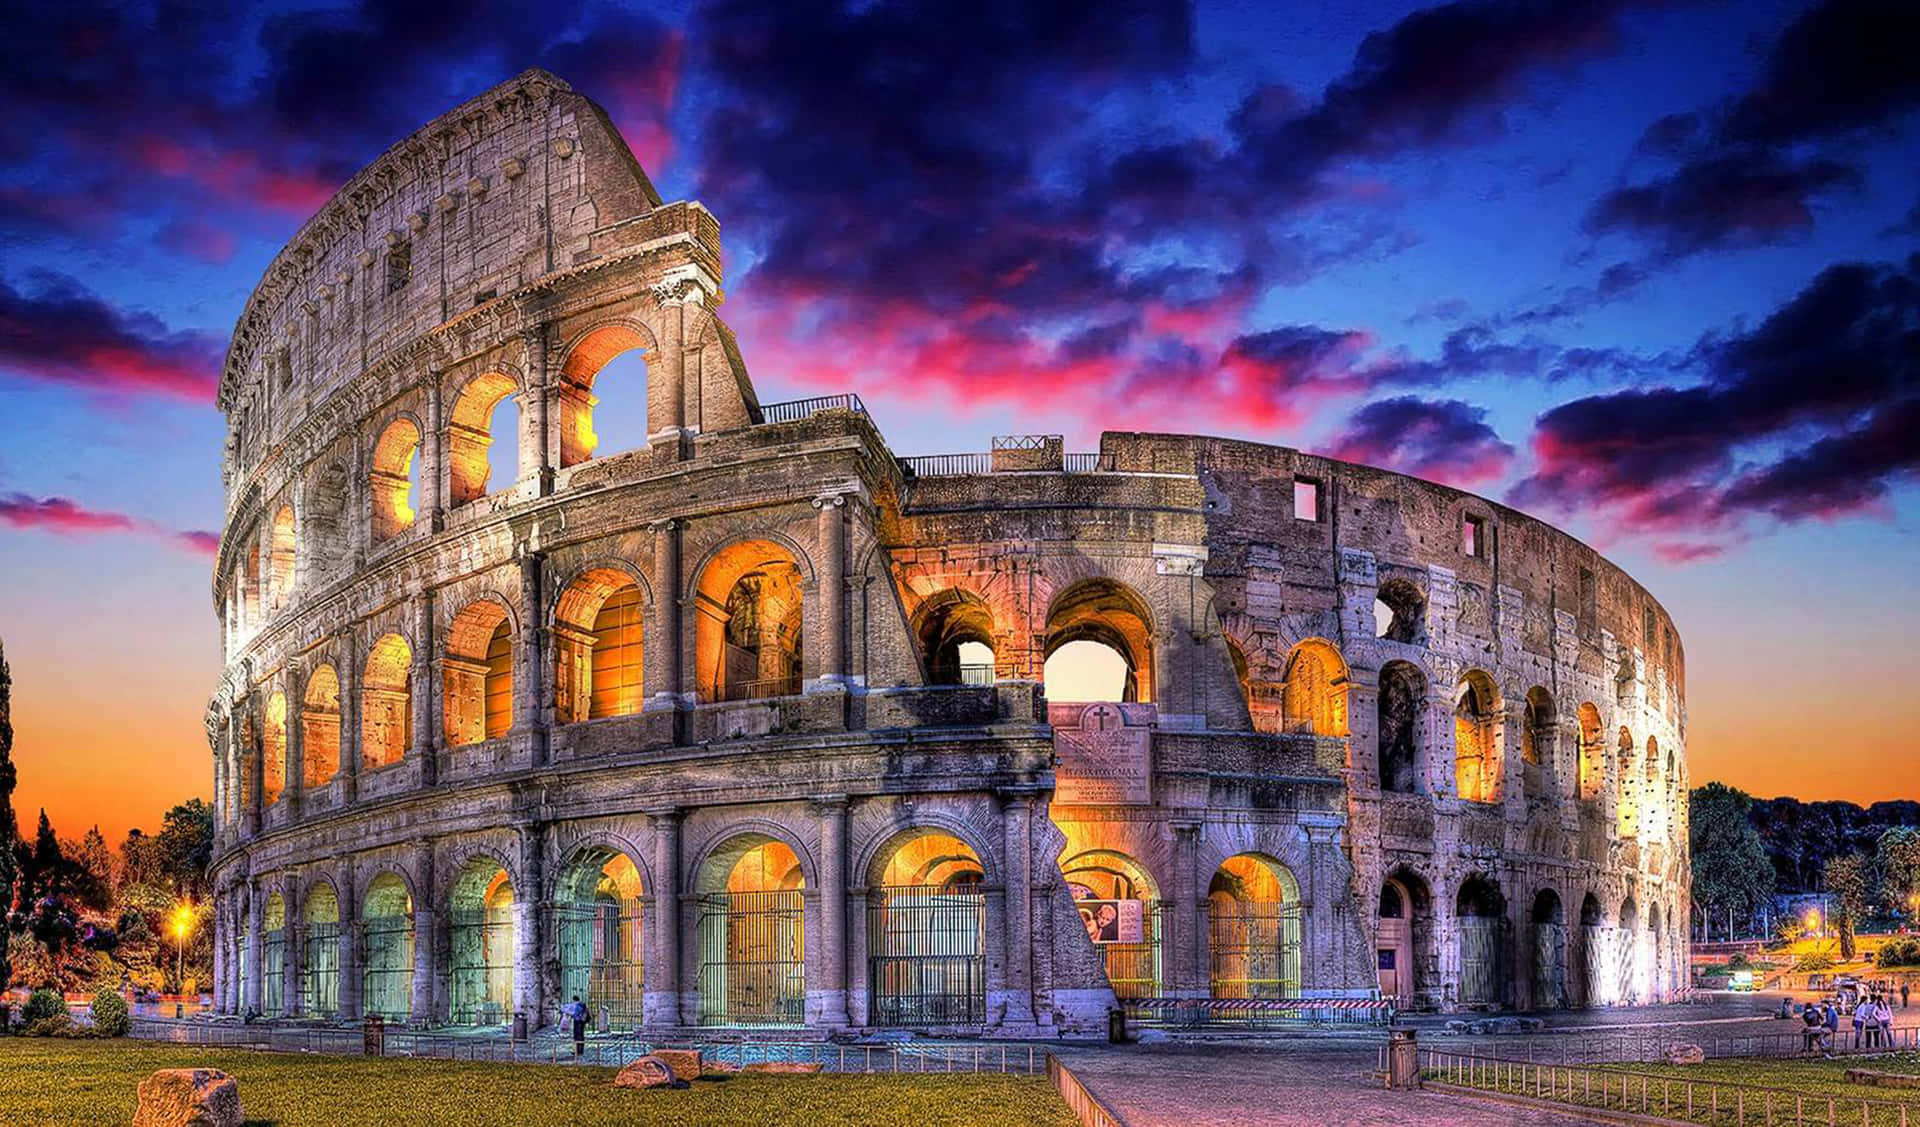 Admire the art and architecture of Ancient Rome